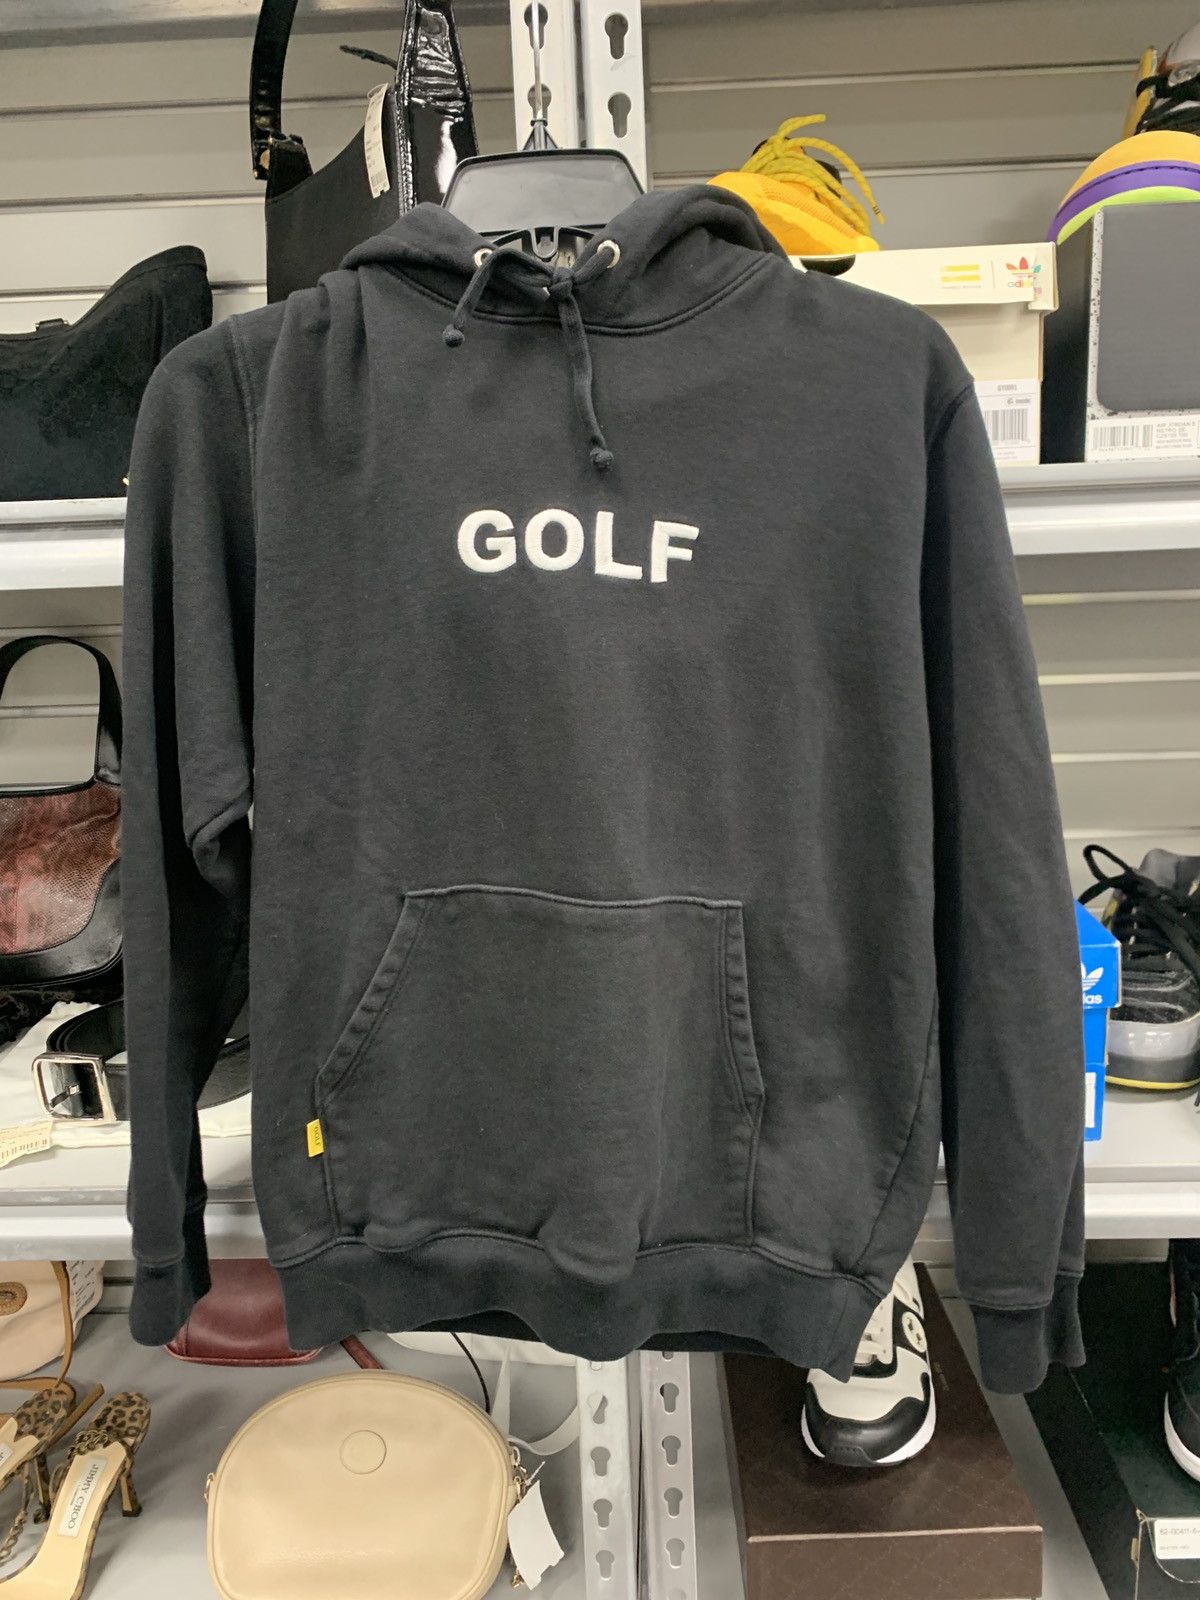 Golf Wang Golf Wang embroidered hoodie black pullover small basic Size US S / EU 44-46 / 1 - 1 Preview